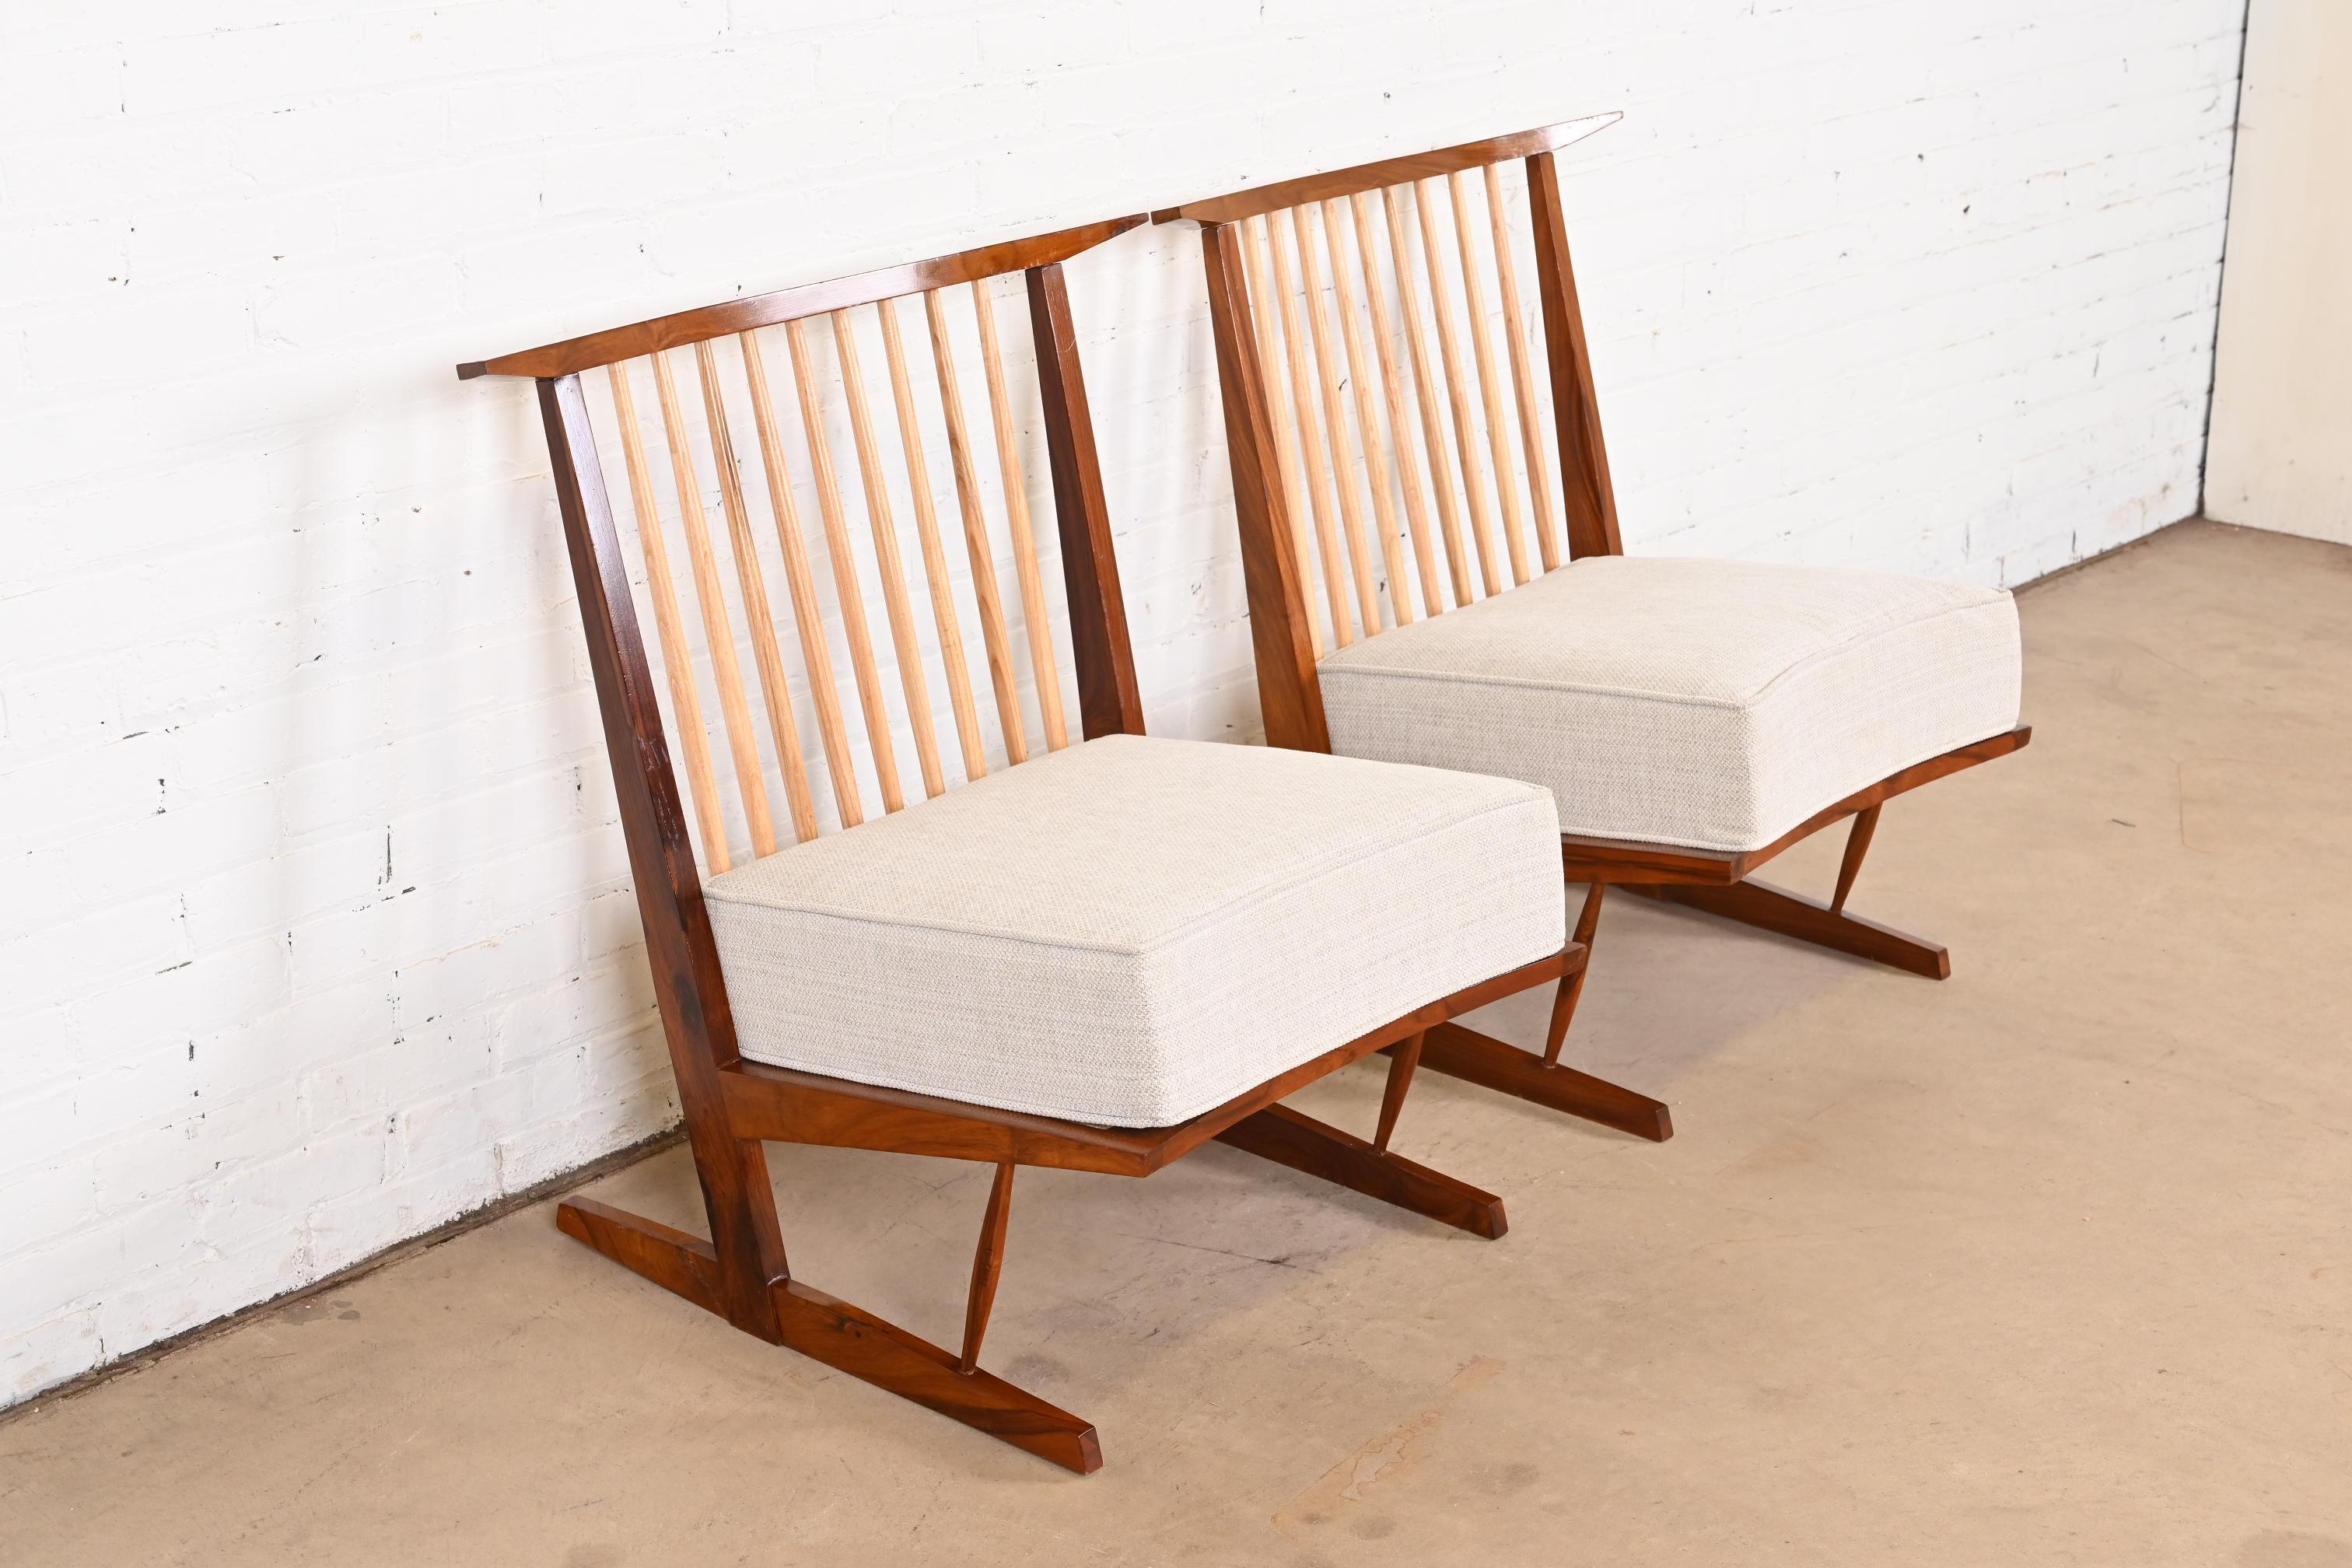 20th Century Conoid Lounge Chairs in Sculpted Walnut After George Nakashima, Pair